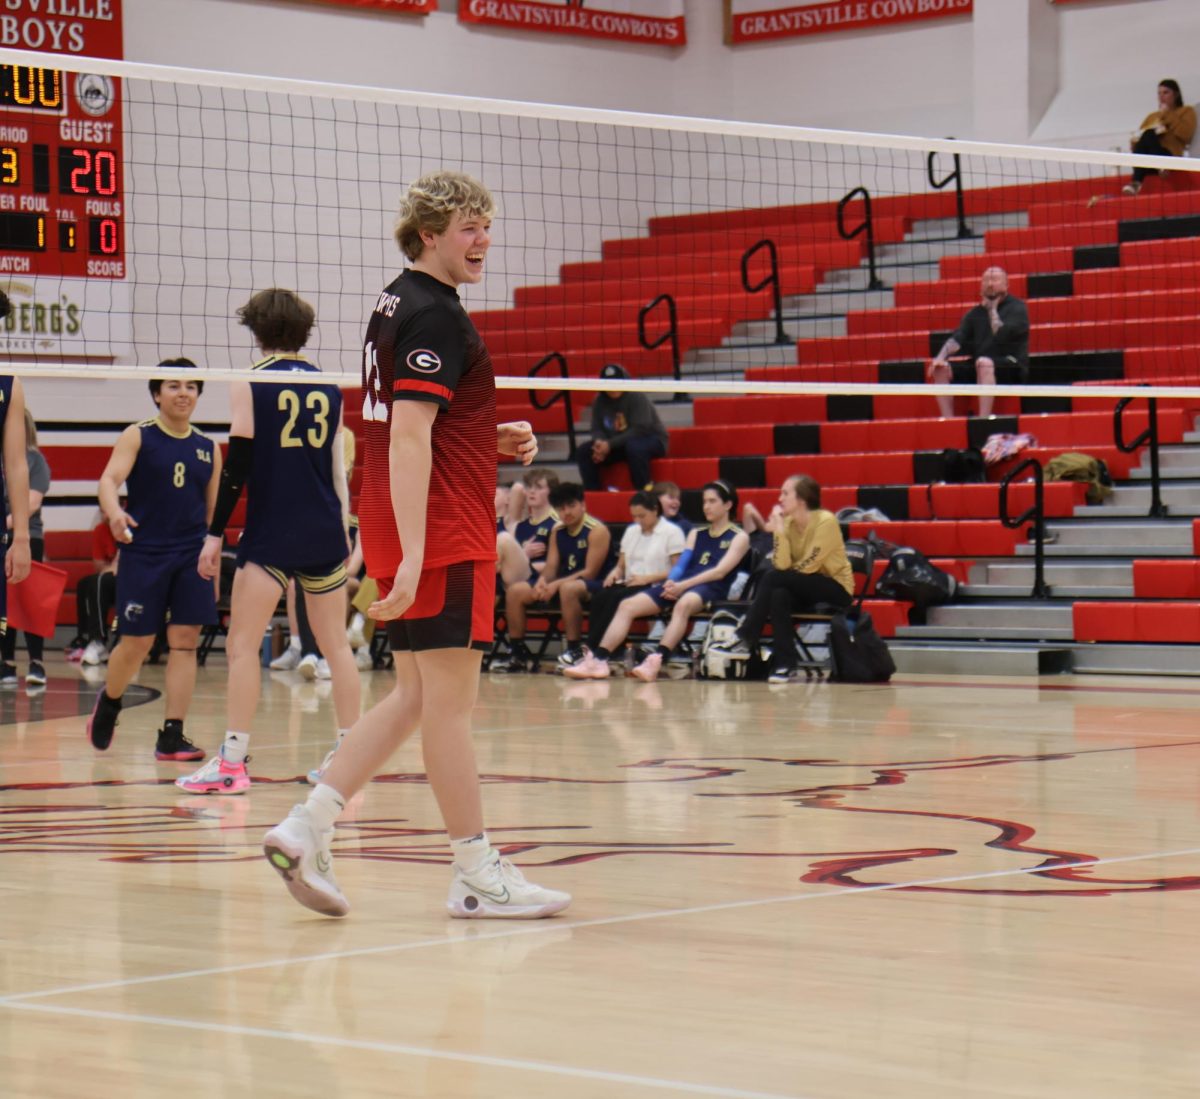 4/4/24 Boys volleyball vs Salt Lake Academy, Max Critchlow celebrating a point.  